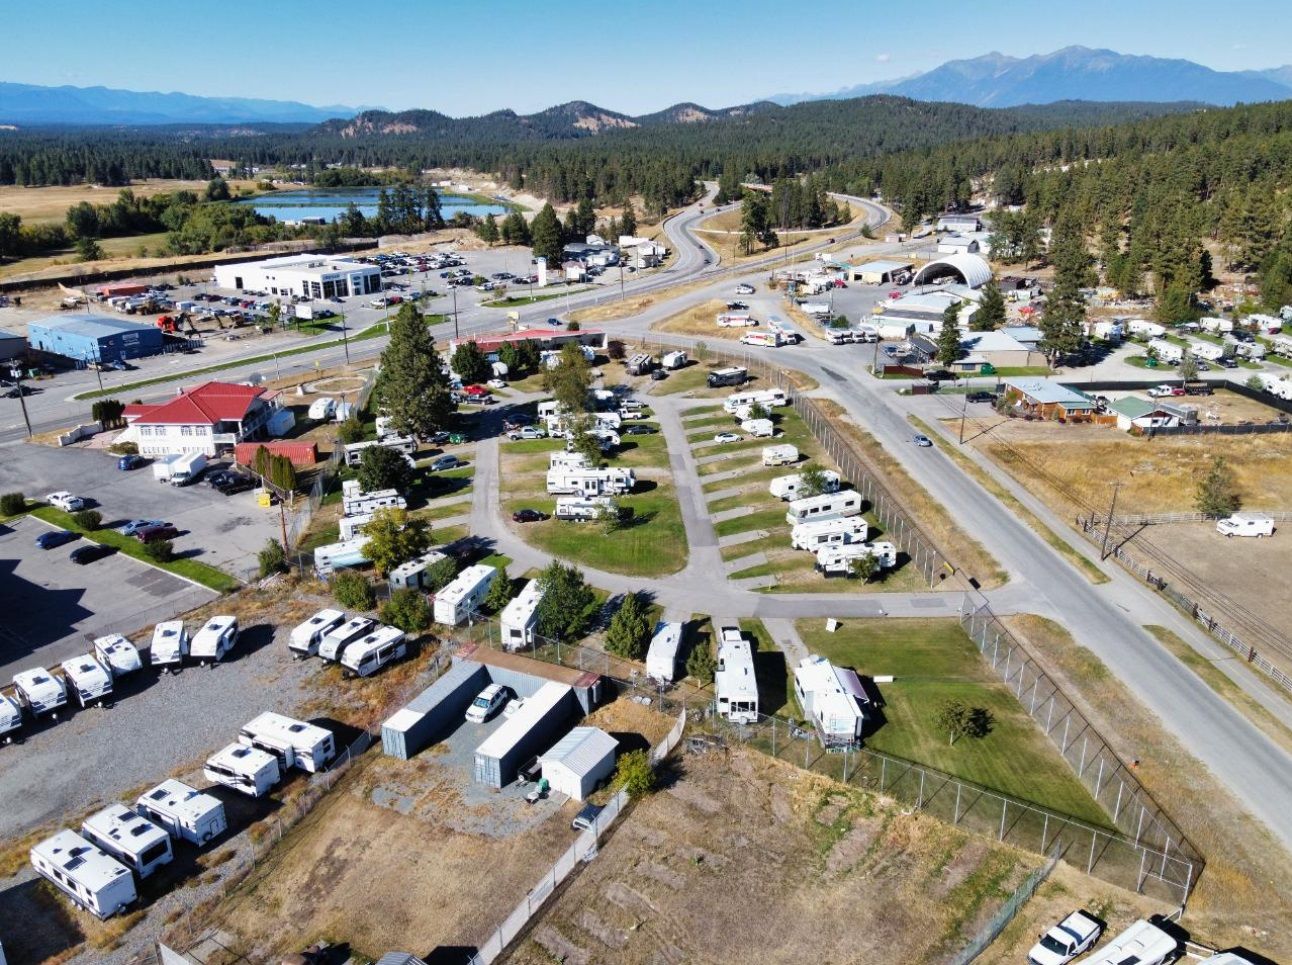 bc rv park for sale, Cranbrook rv park for sale, rv storage for sale bc, commercial land for sale bc, bc land for sale